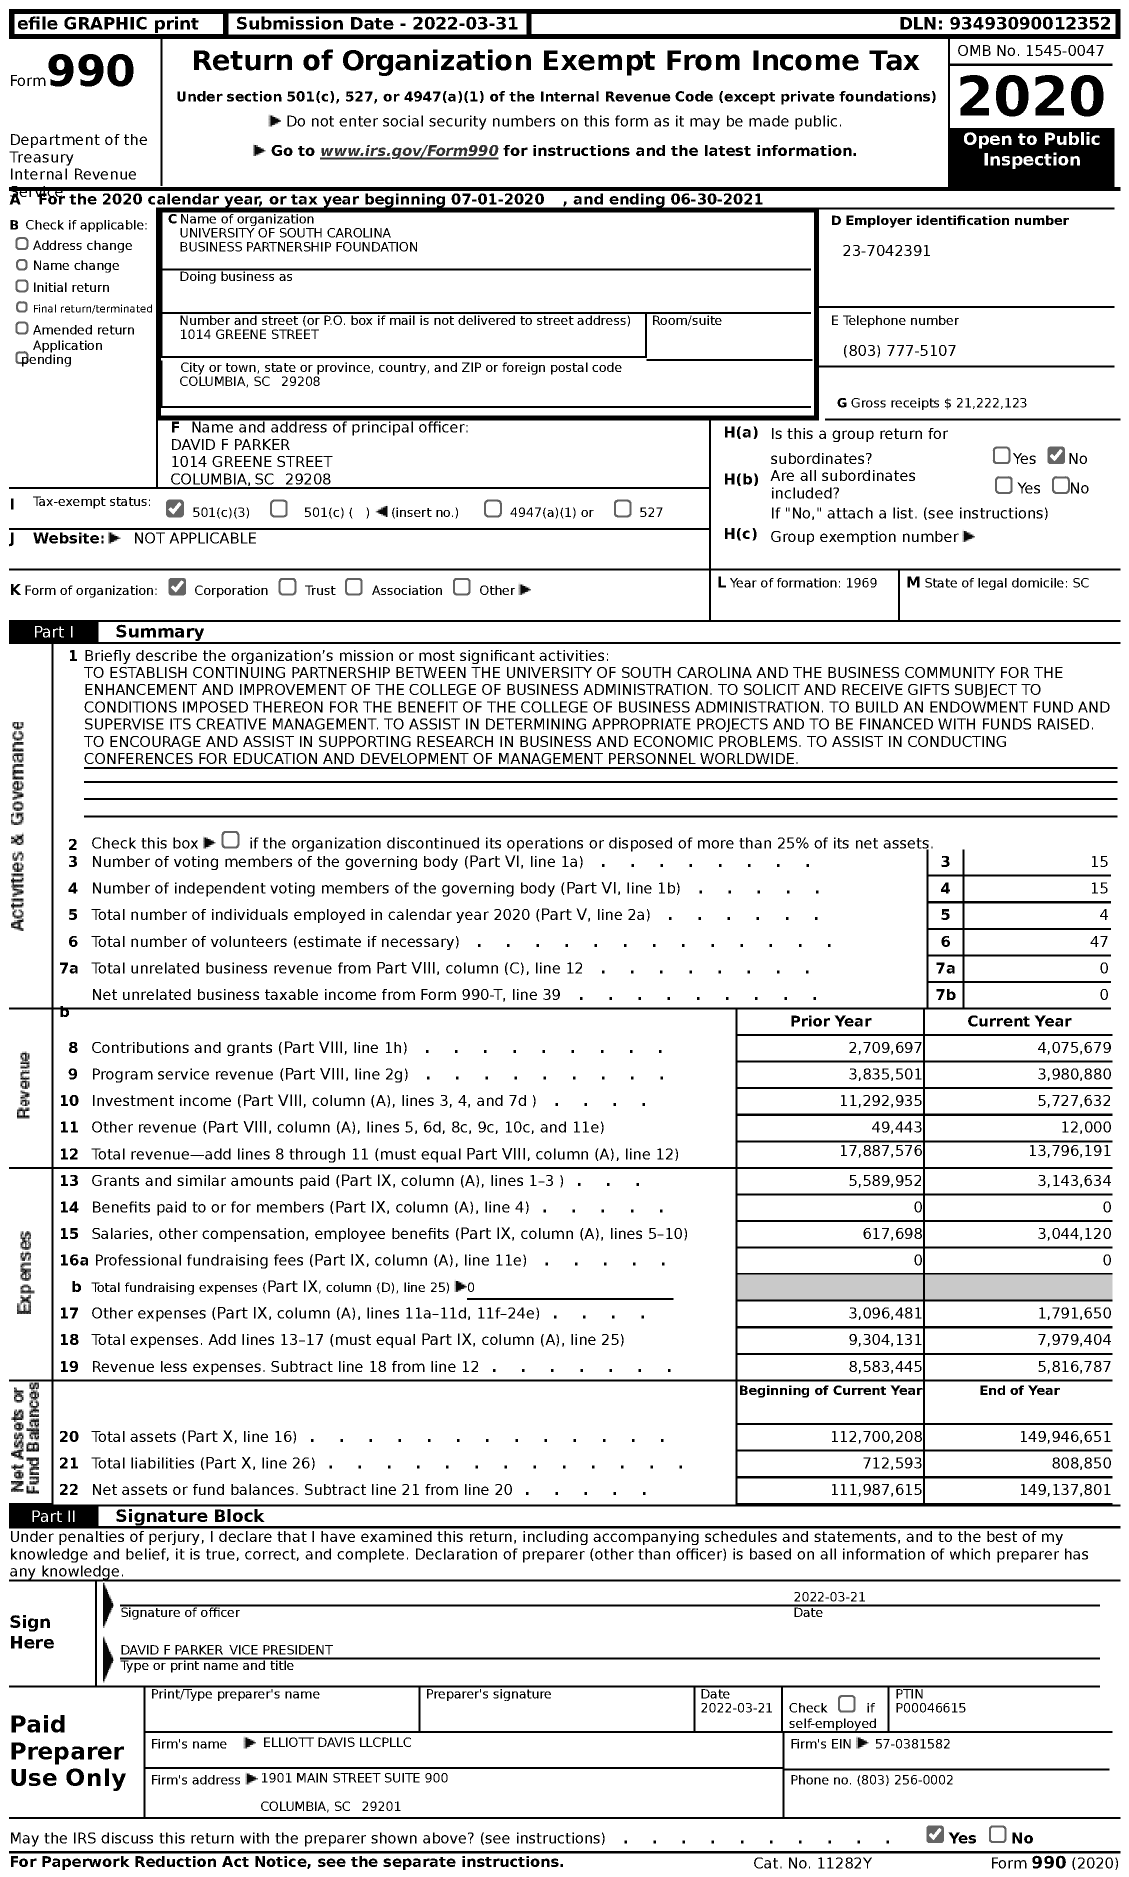 Image of first page of 2020 Form 990 for University of South Carolina Business Partnership Foundation